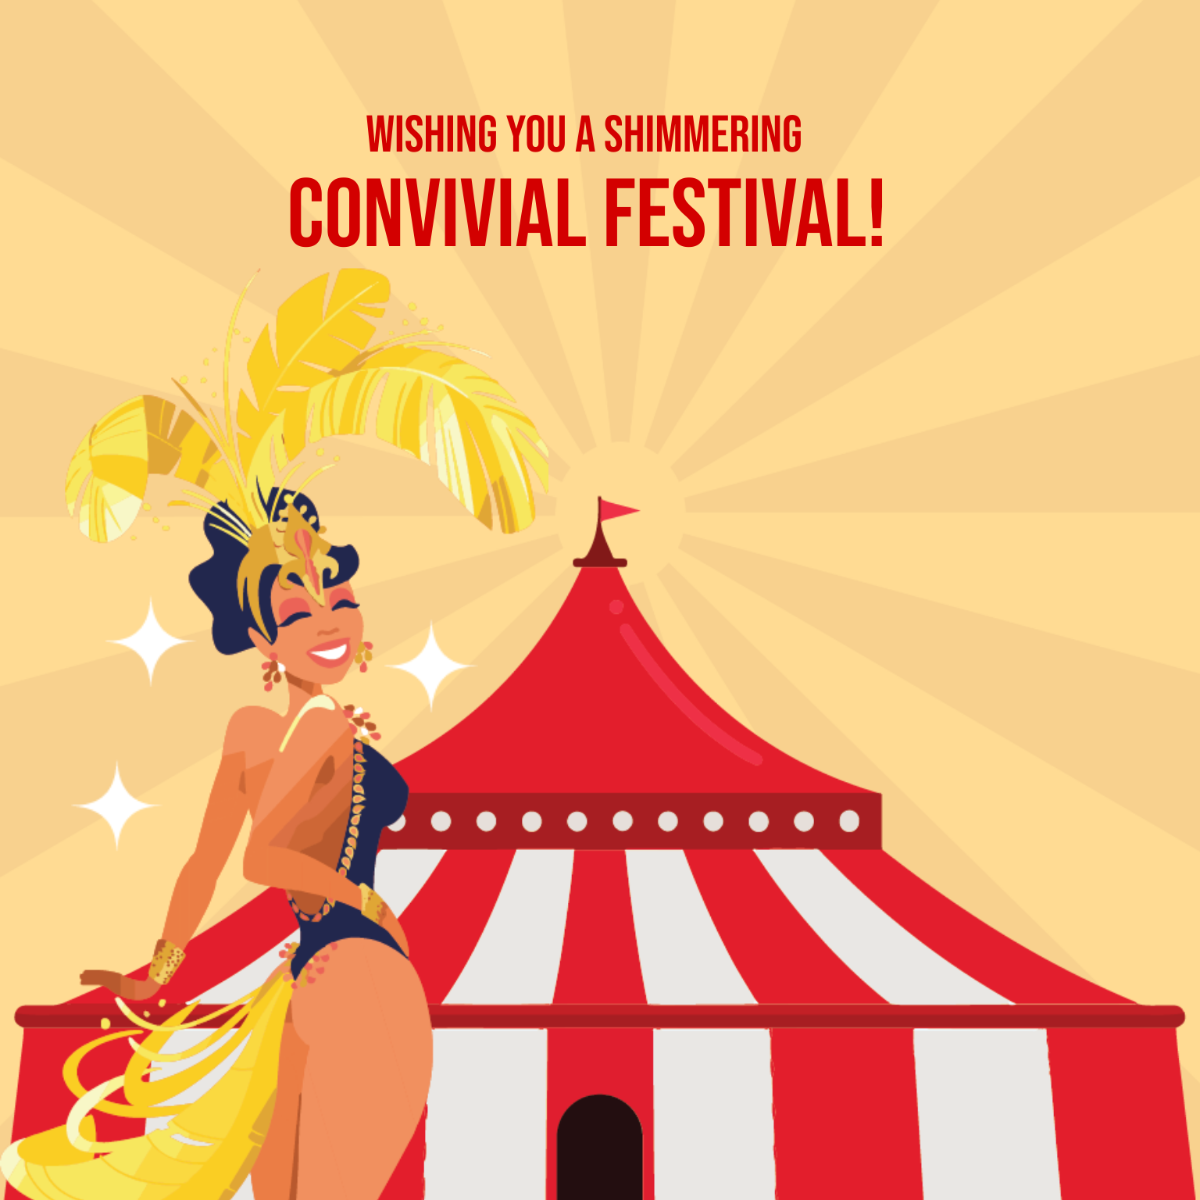 Free Carnival Festival Wishes Vector Template